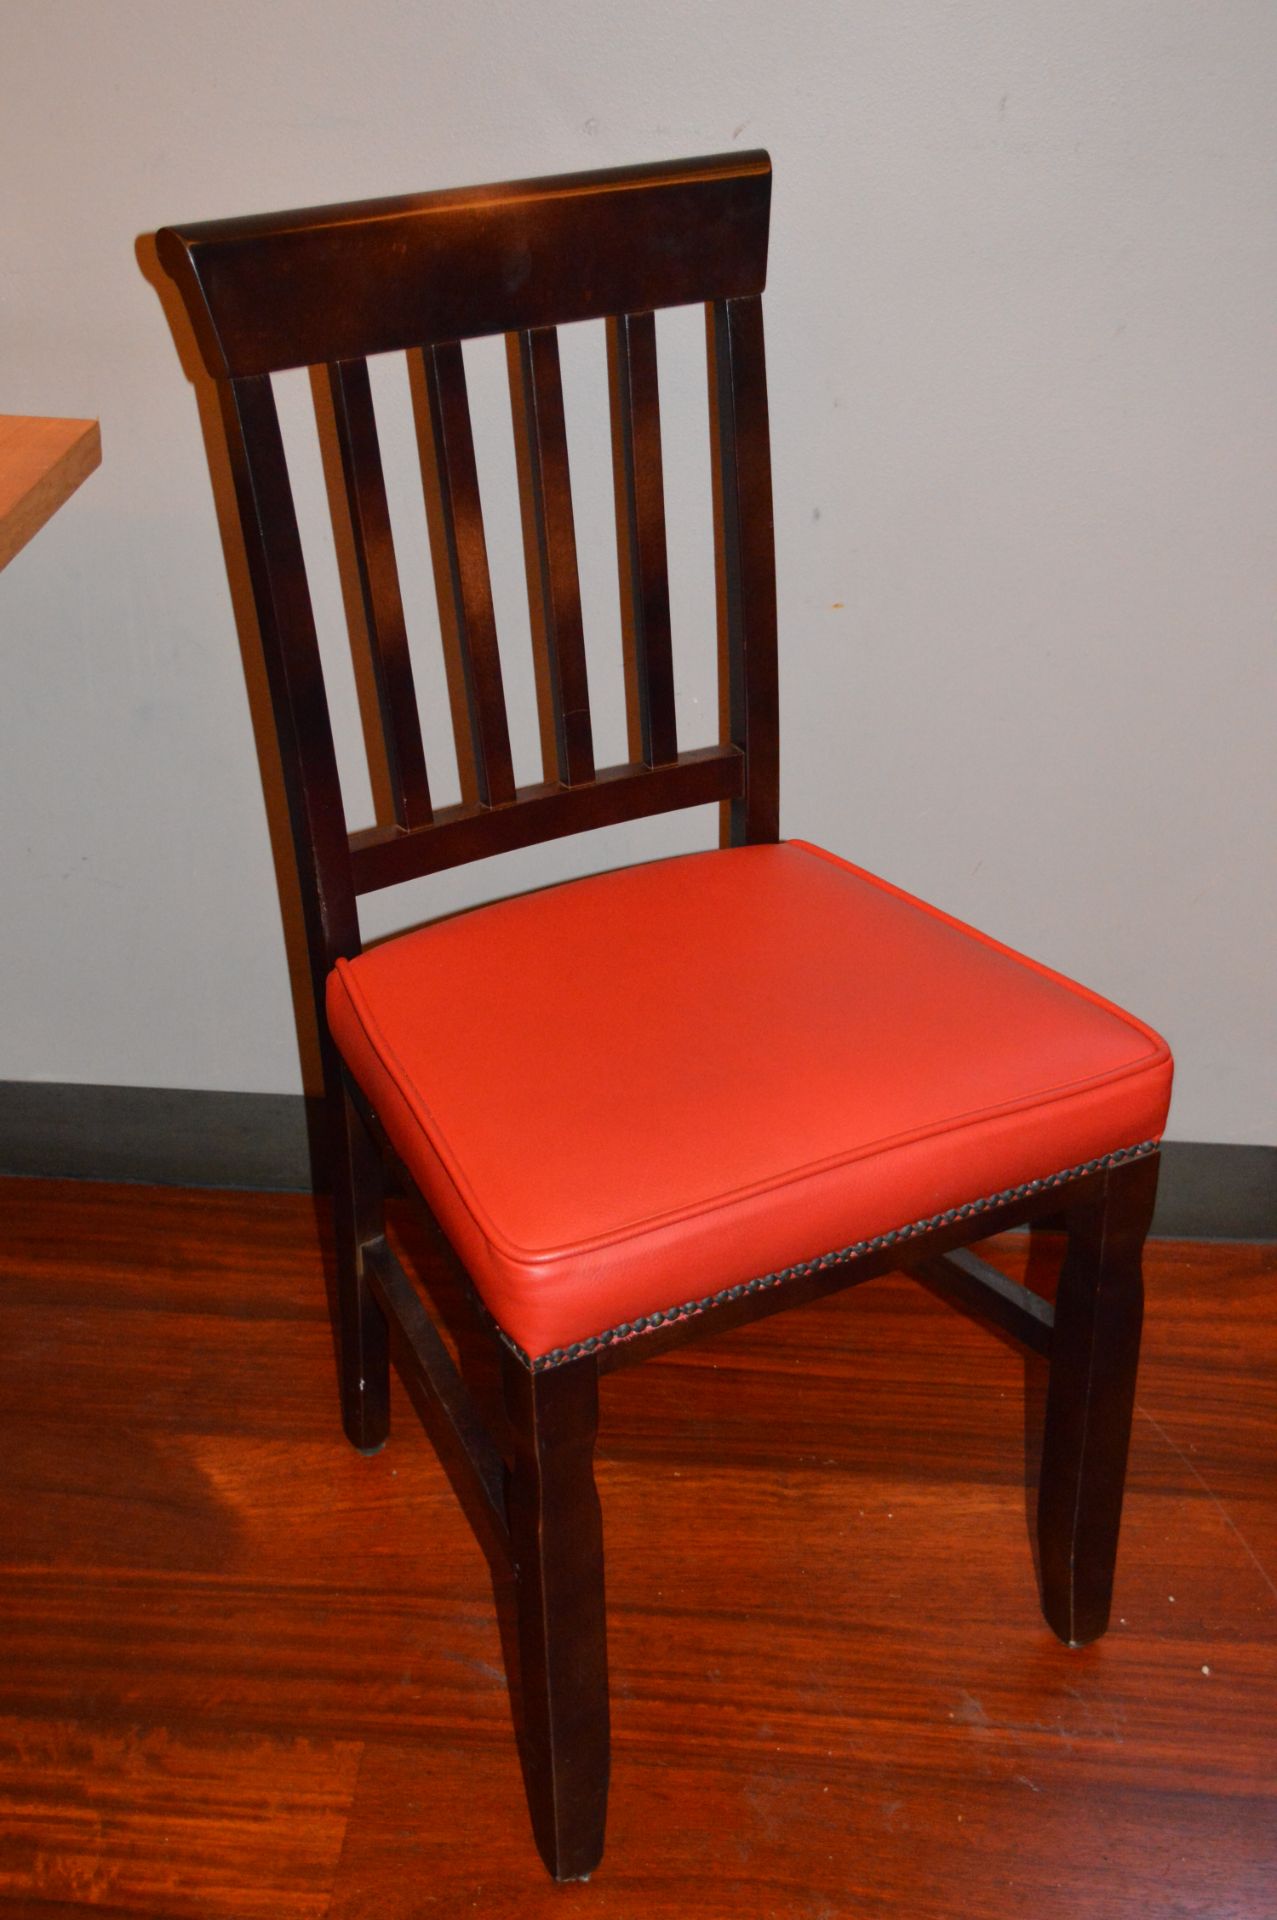 6 x High Back Dining Chairs With Red Leather Seat Cushions and Studded Detail - Hardwoord Frames -